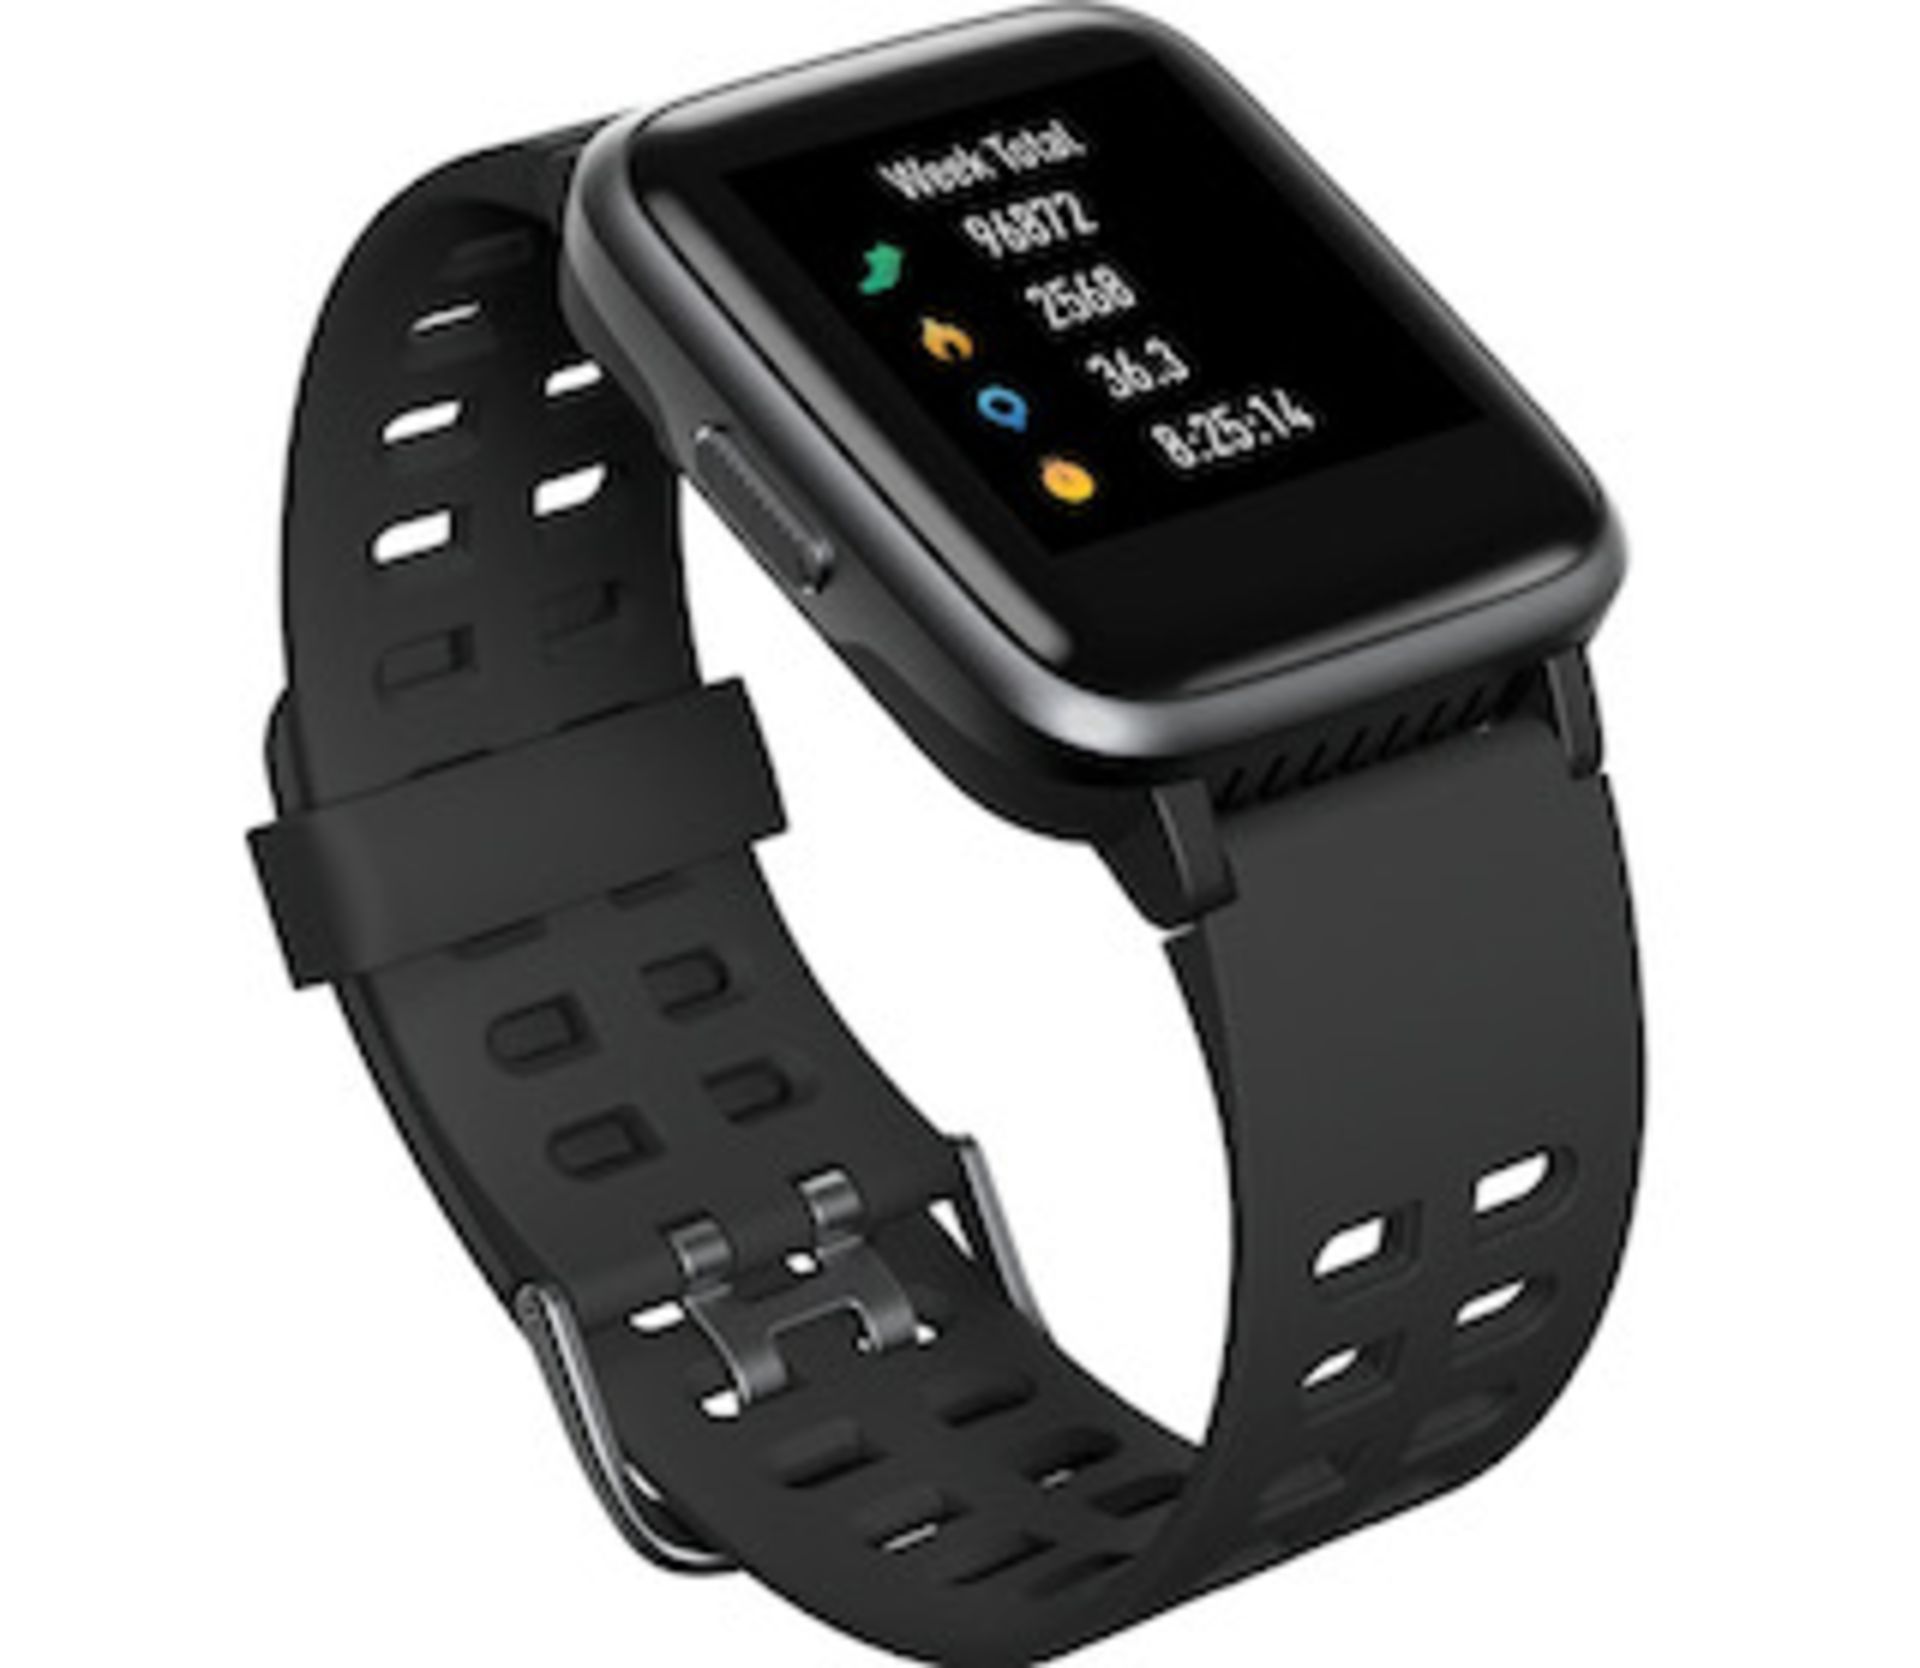 Brand New Unisex Fitness Tracker Watch Id205 Black Strap About This Item 1.3-Inch LCD Colour - Image 19 of 30